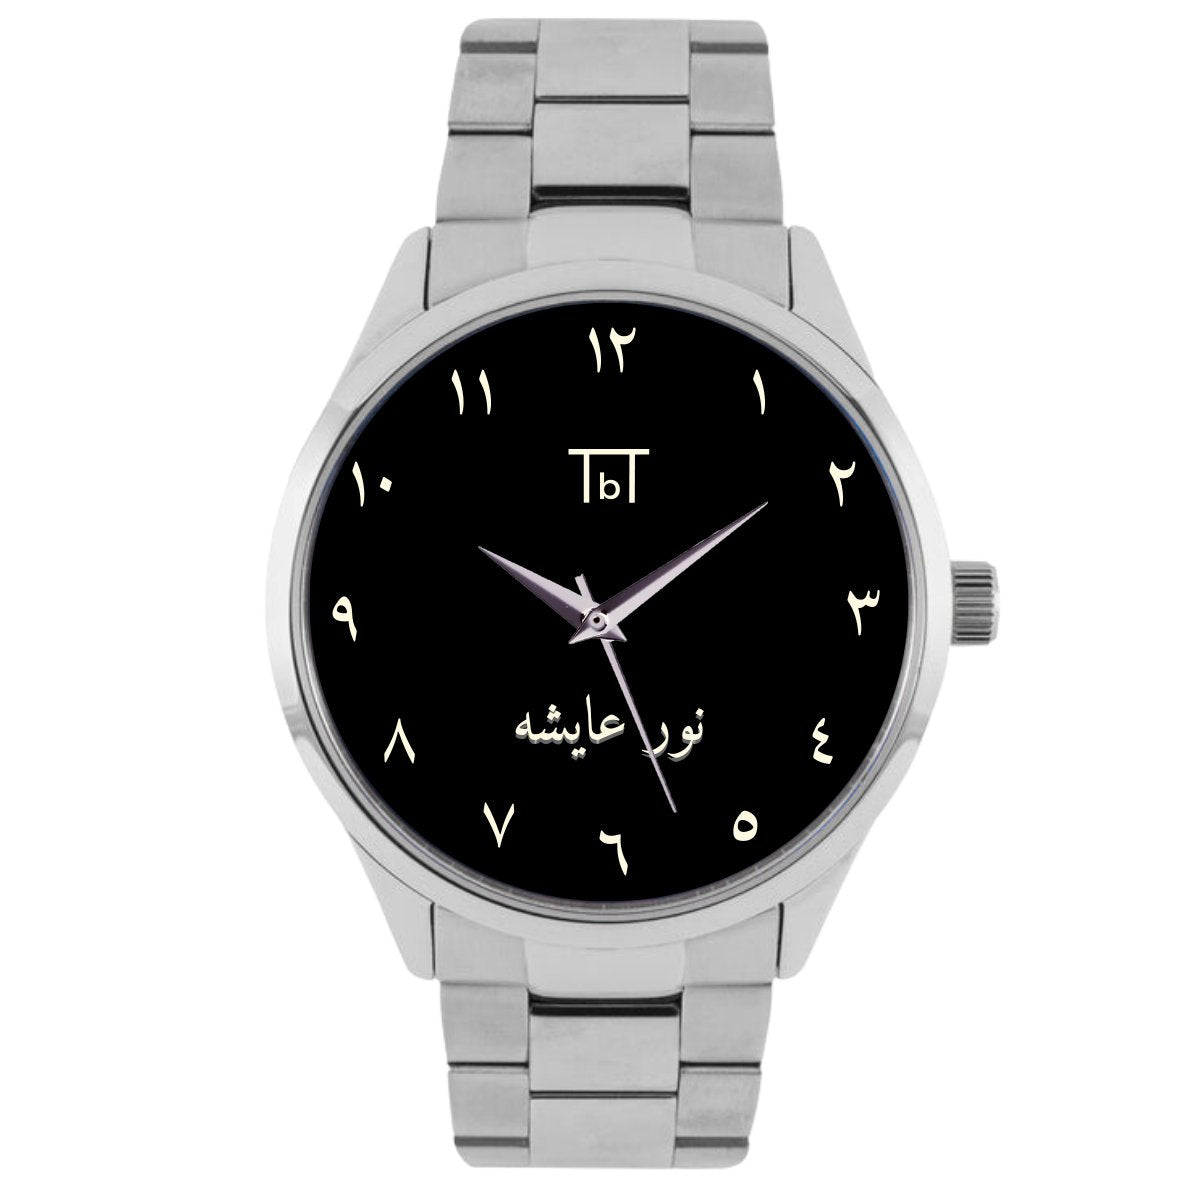 Arabic Dial Watch in Silver Stainless Steel FOR HIM - TbT WatchesTbT Watches